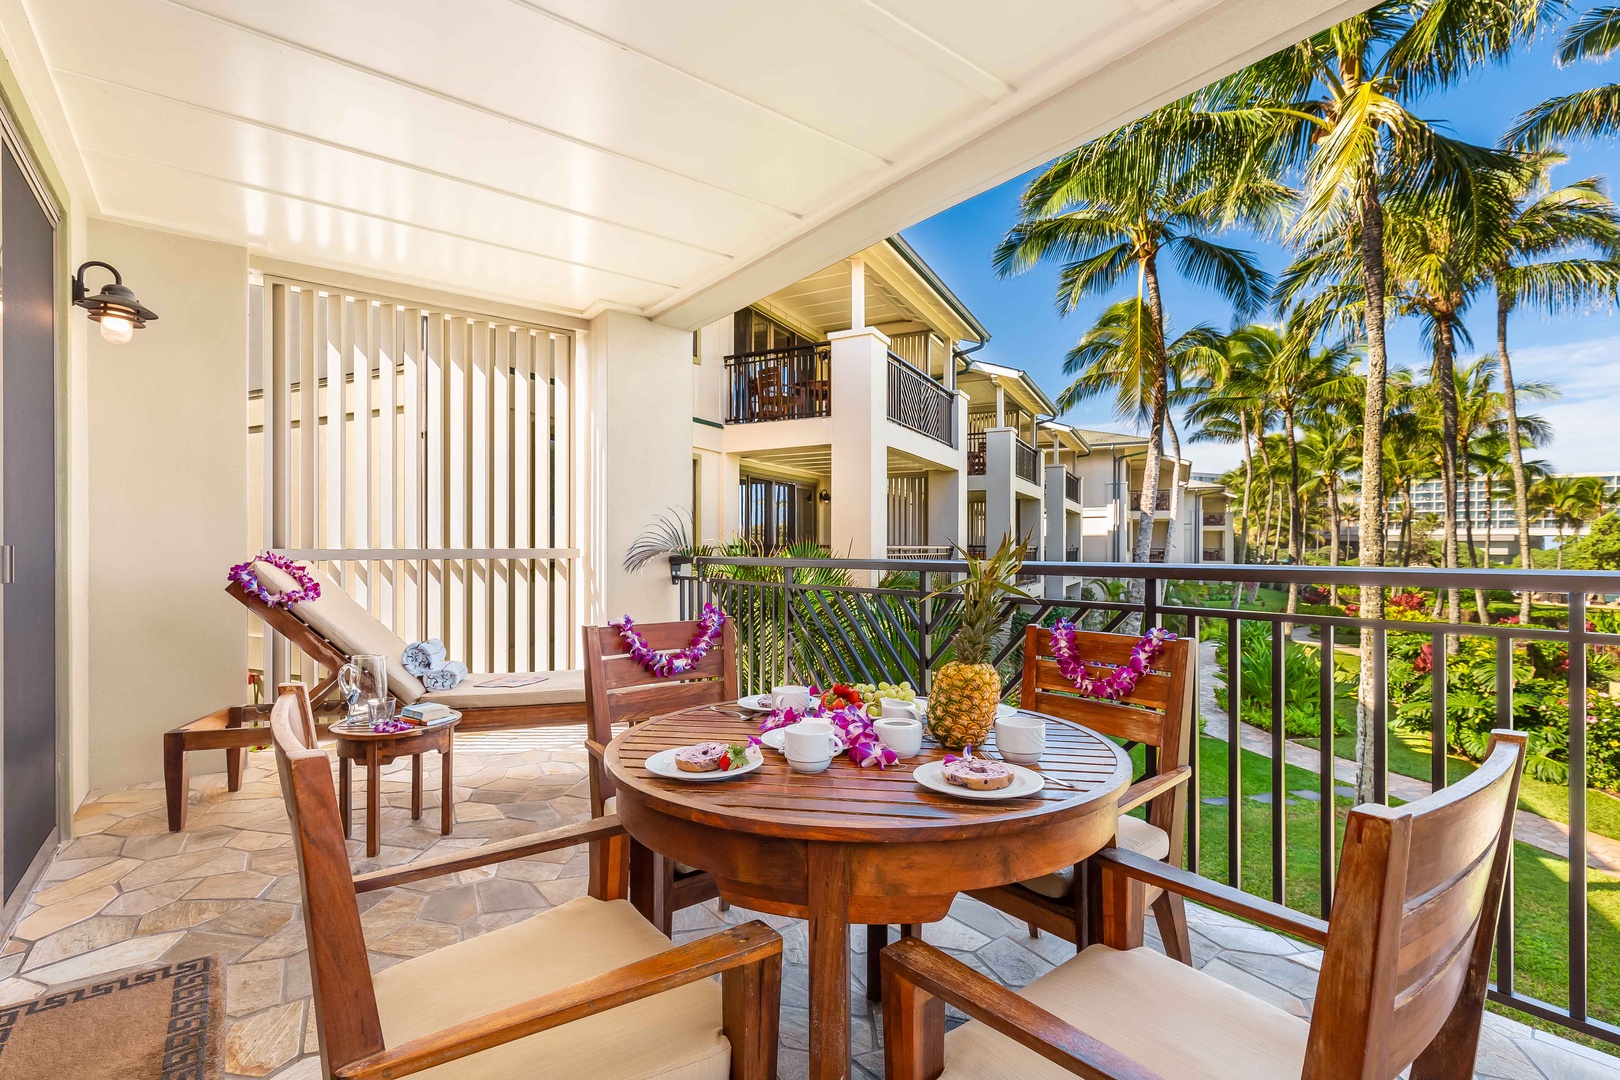 Kahuku Vacation Rentals, Turtle Bay Villas 210 - Wake up in the morning and start taking in all the good vibes of the island with a great Ocean View